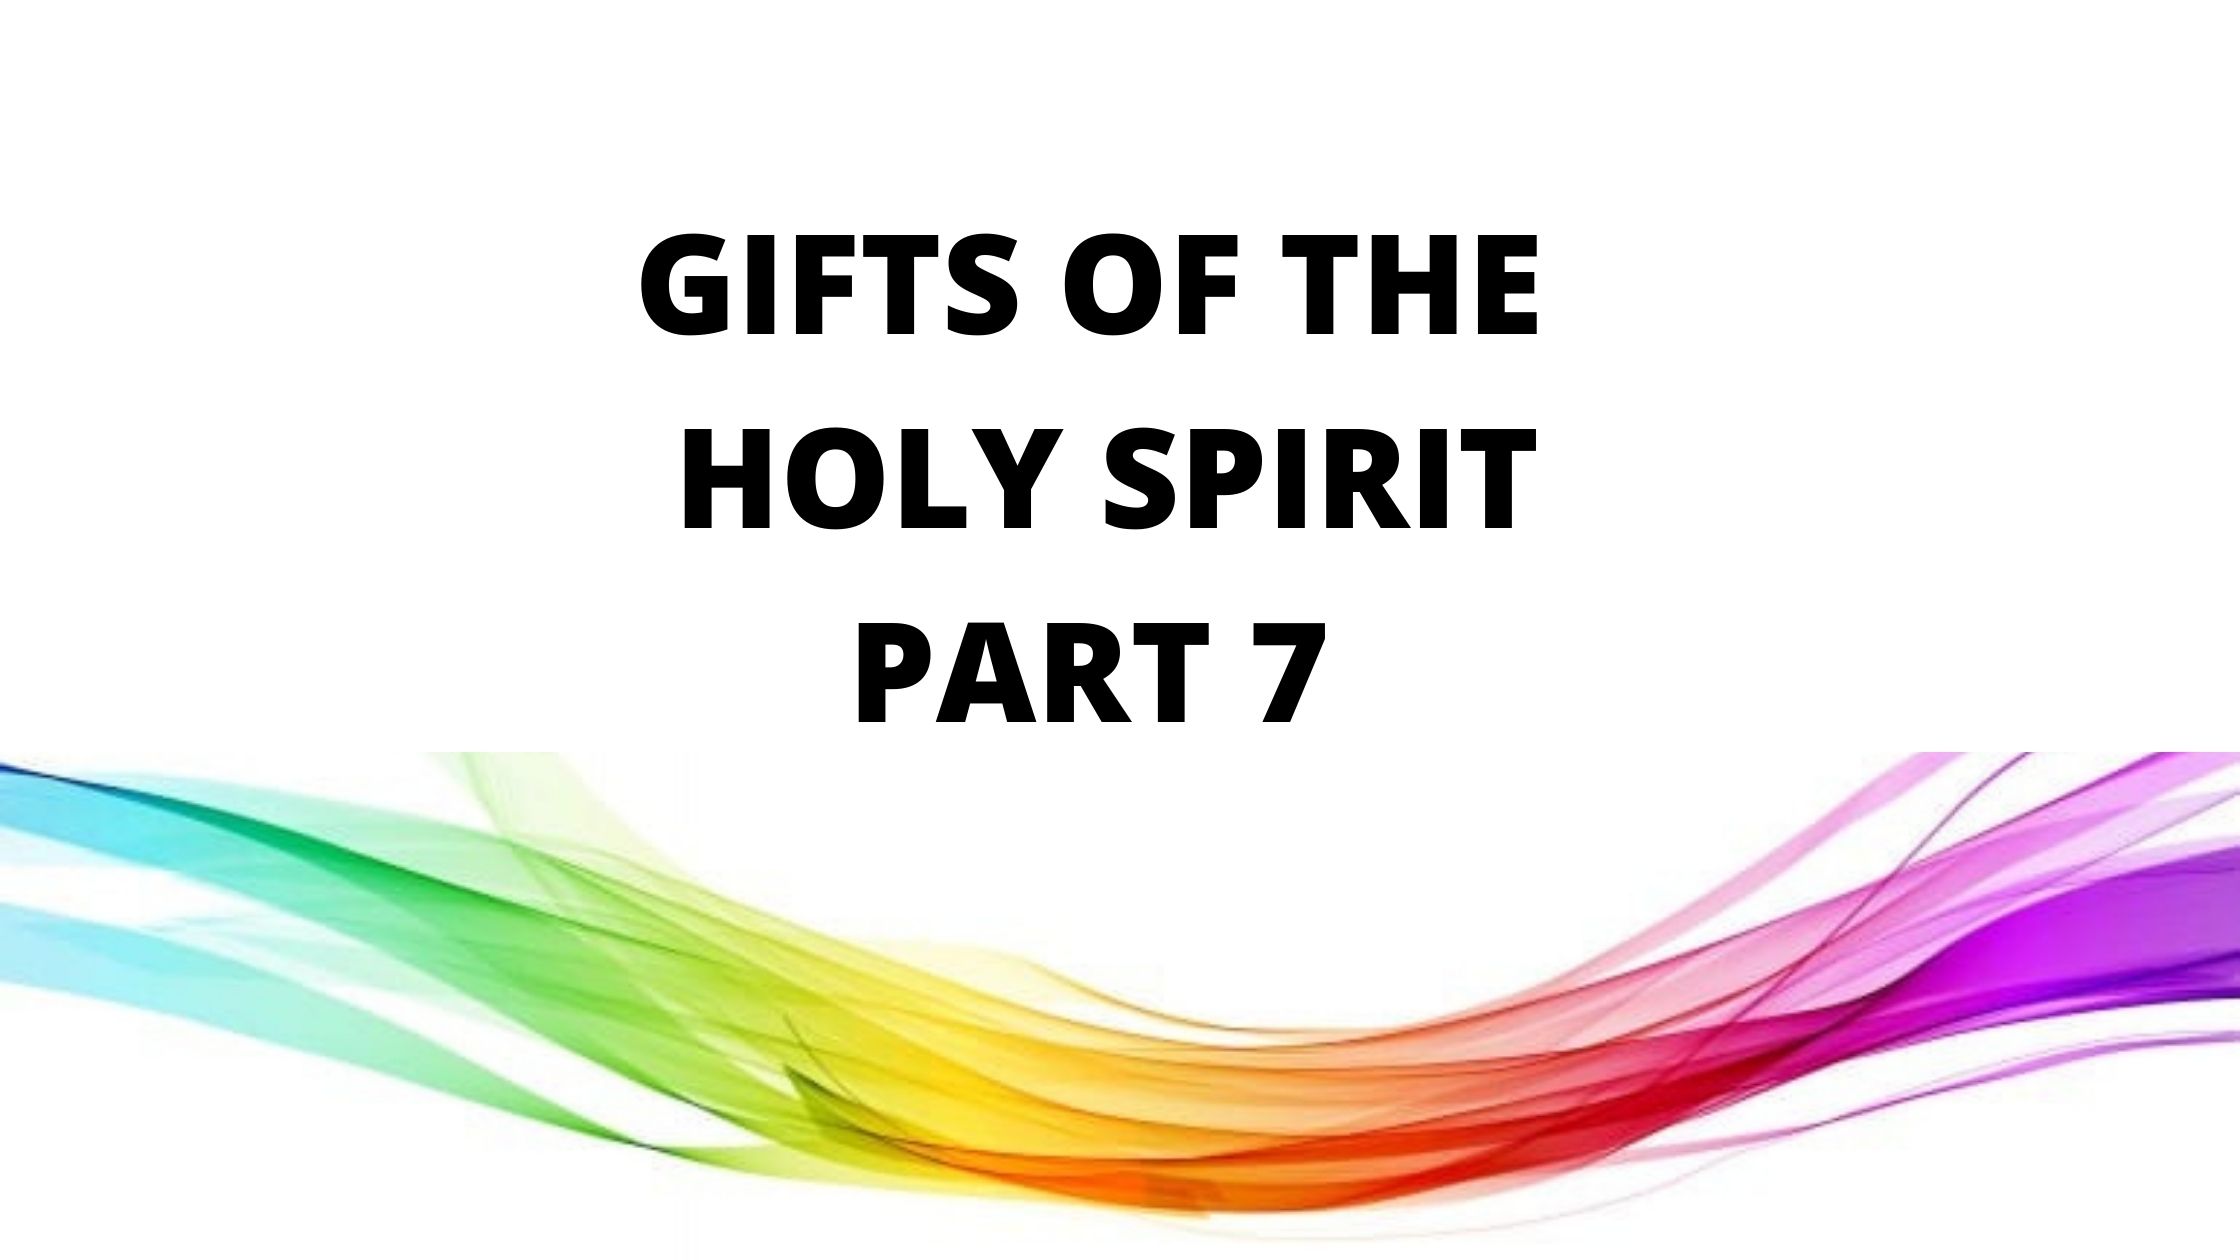 What Are The 4 Gifts Of The Holy Spirit